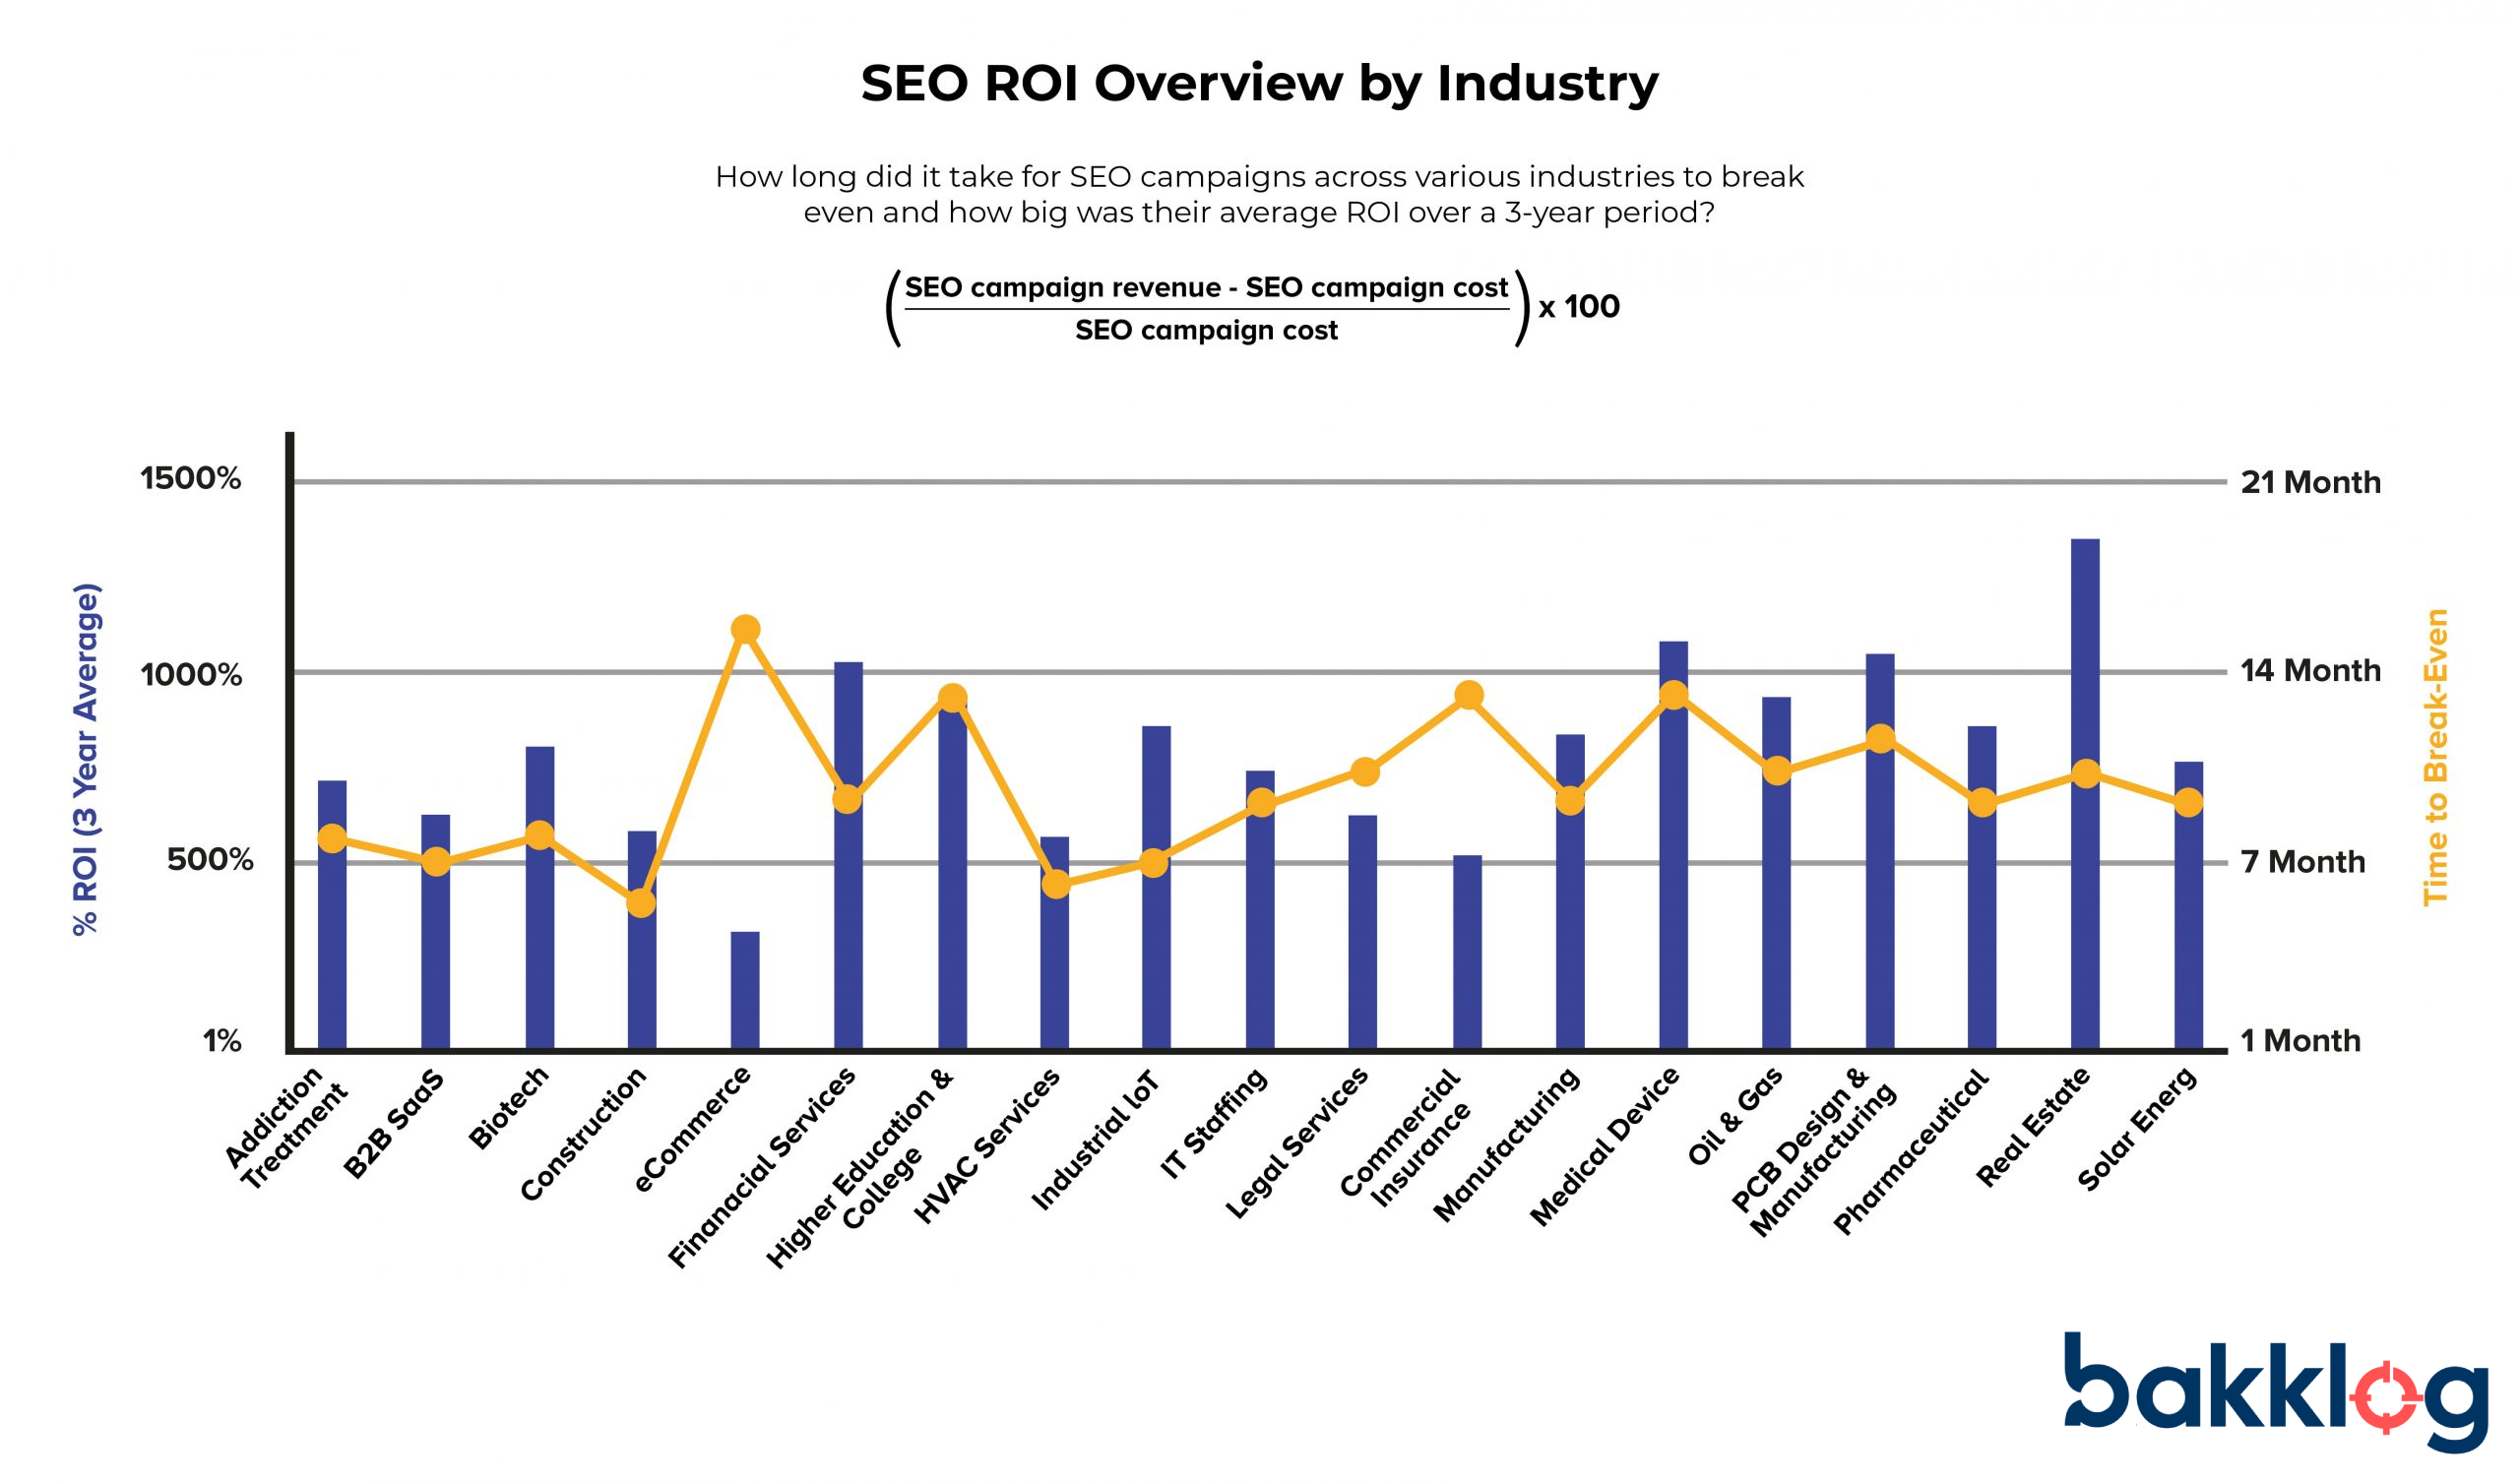 SEO cost can provide great ROI if you focus on local SEO, keyword research and link building